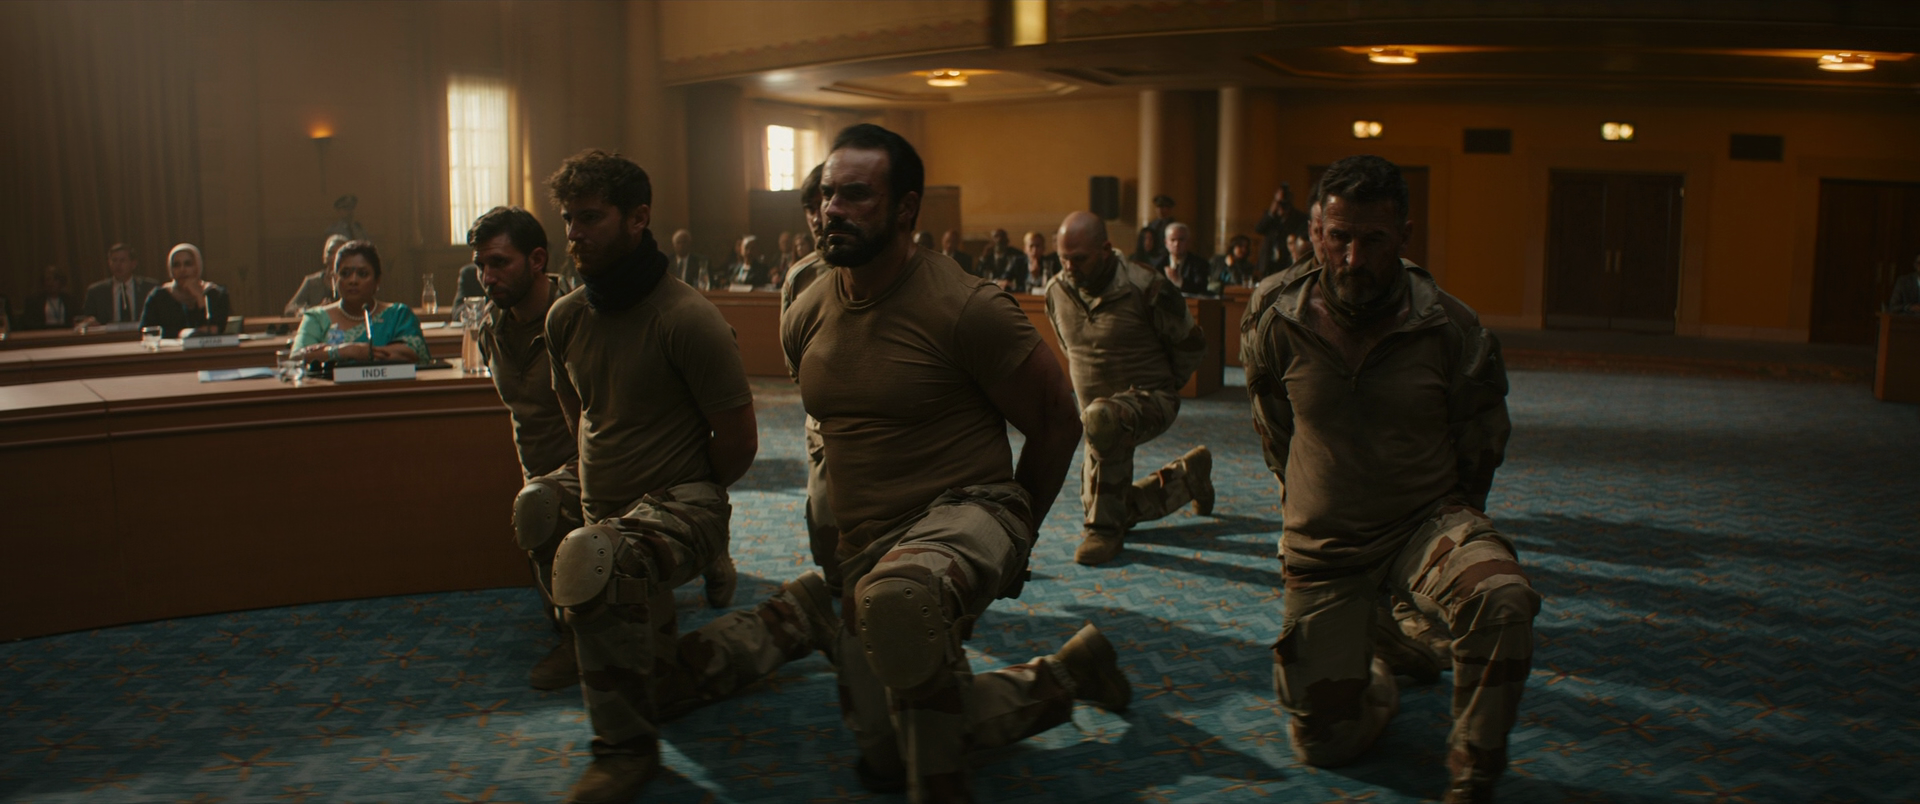 A team of French soldiers is brought before the United Nations in Black Panther: Wakanda Forever (2022), Marvel Entertainment